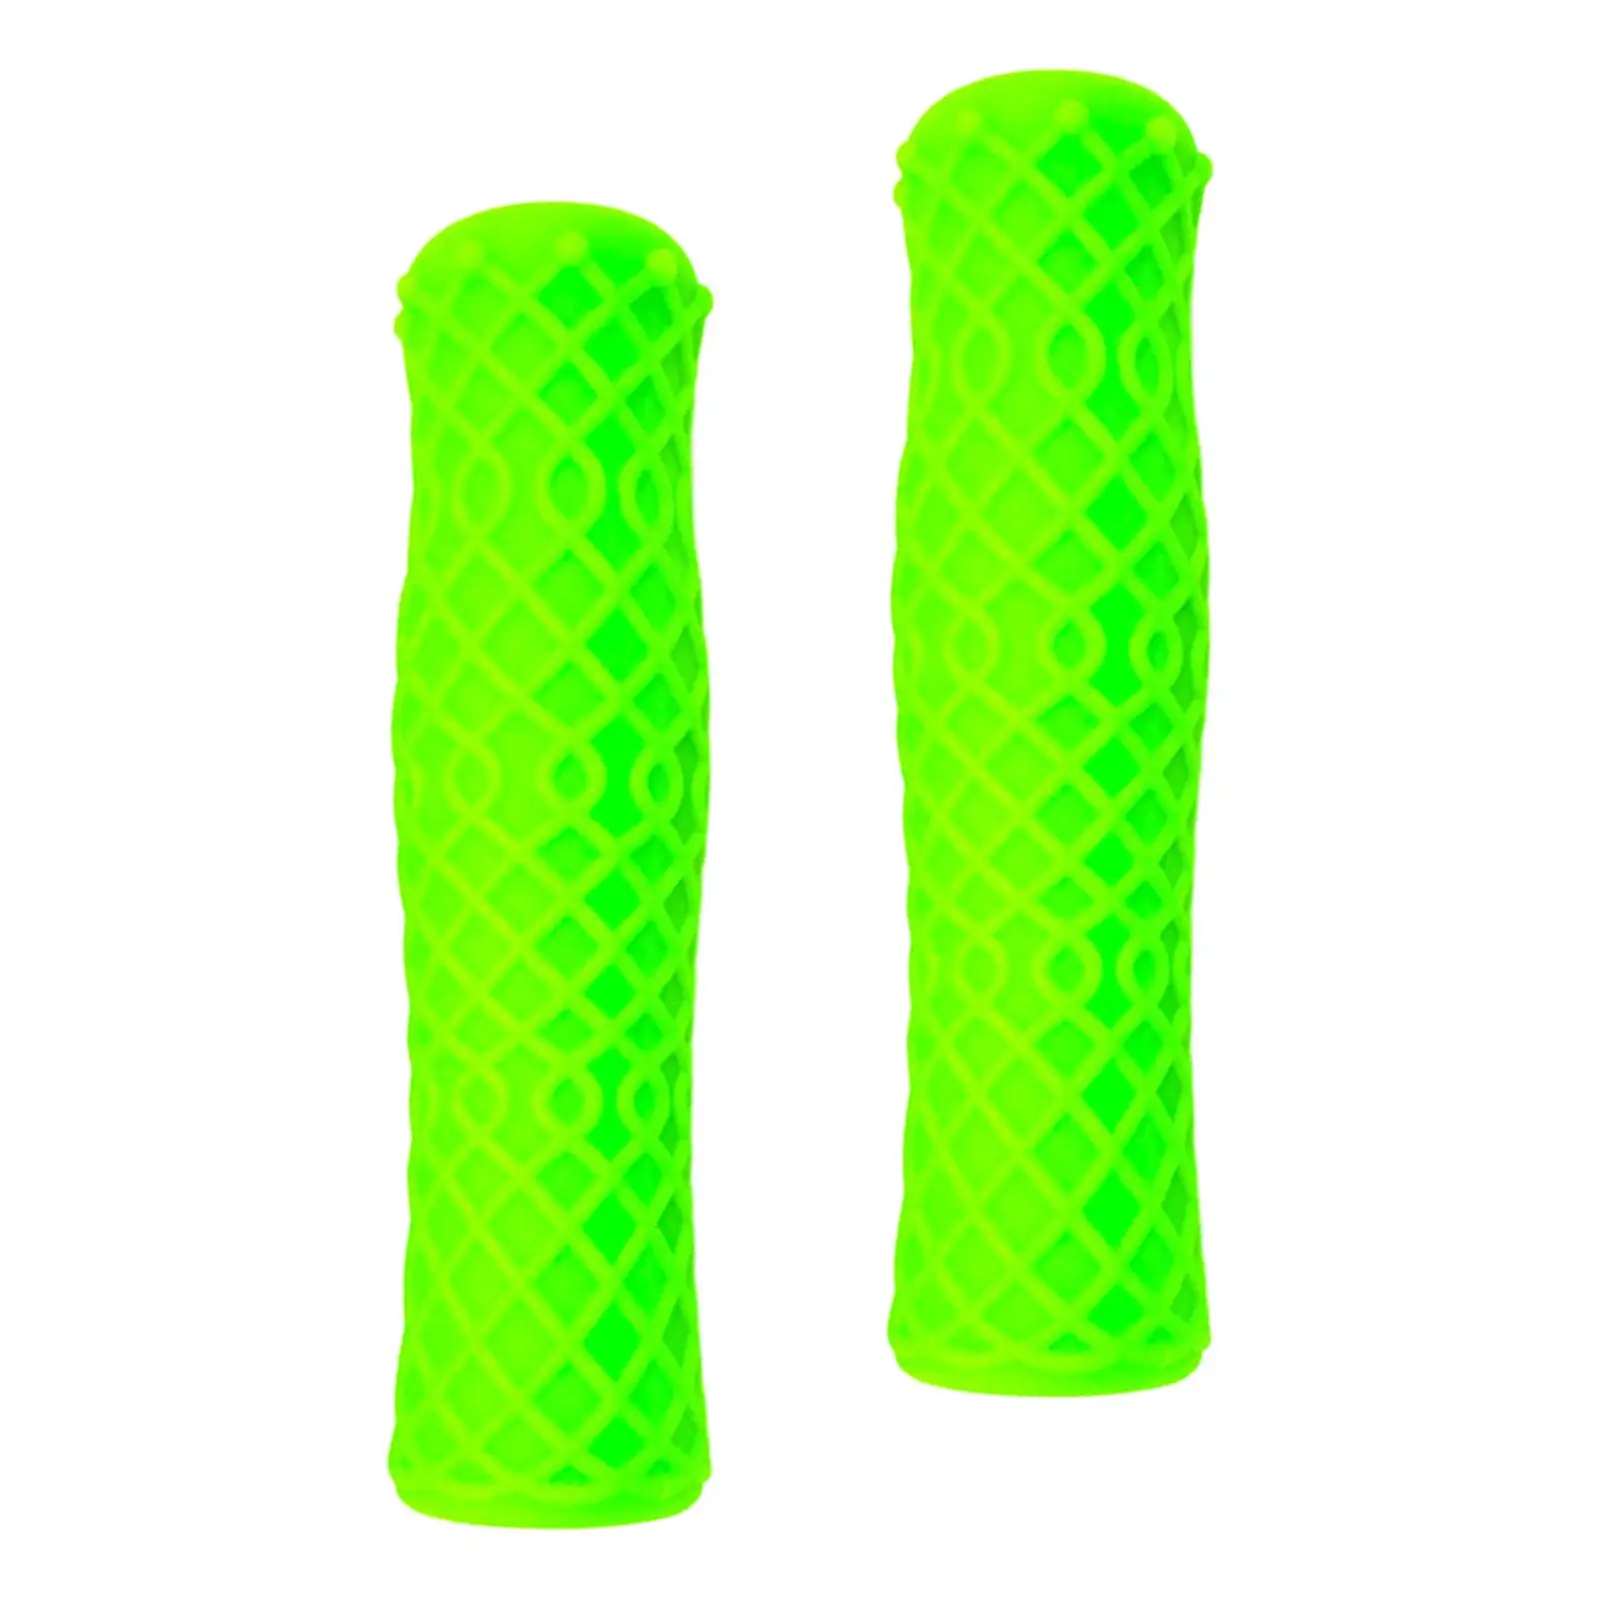 2x Handle Bar Grips Cover Bike Grips for BMX Foldable Mountain Bikes